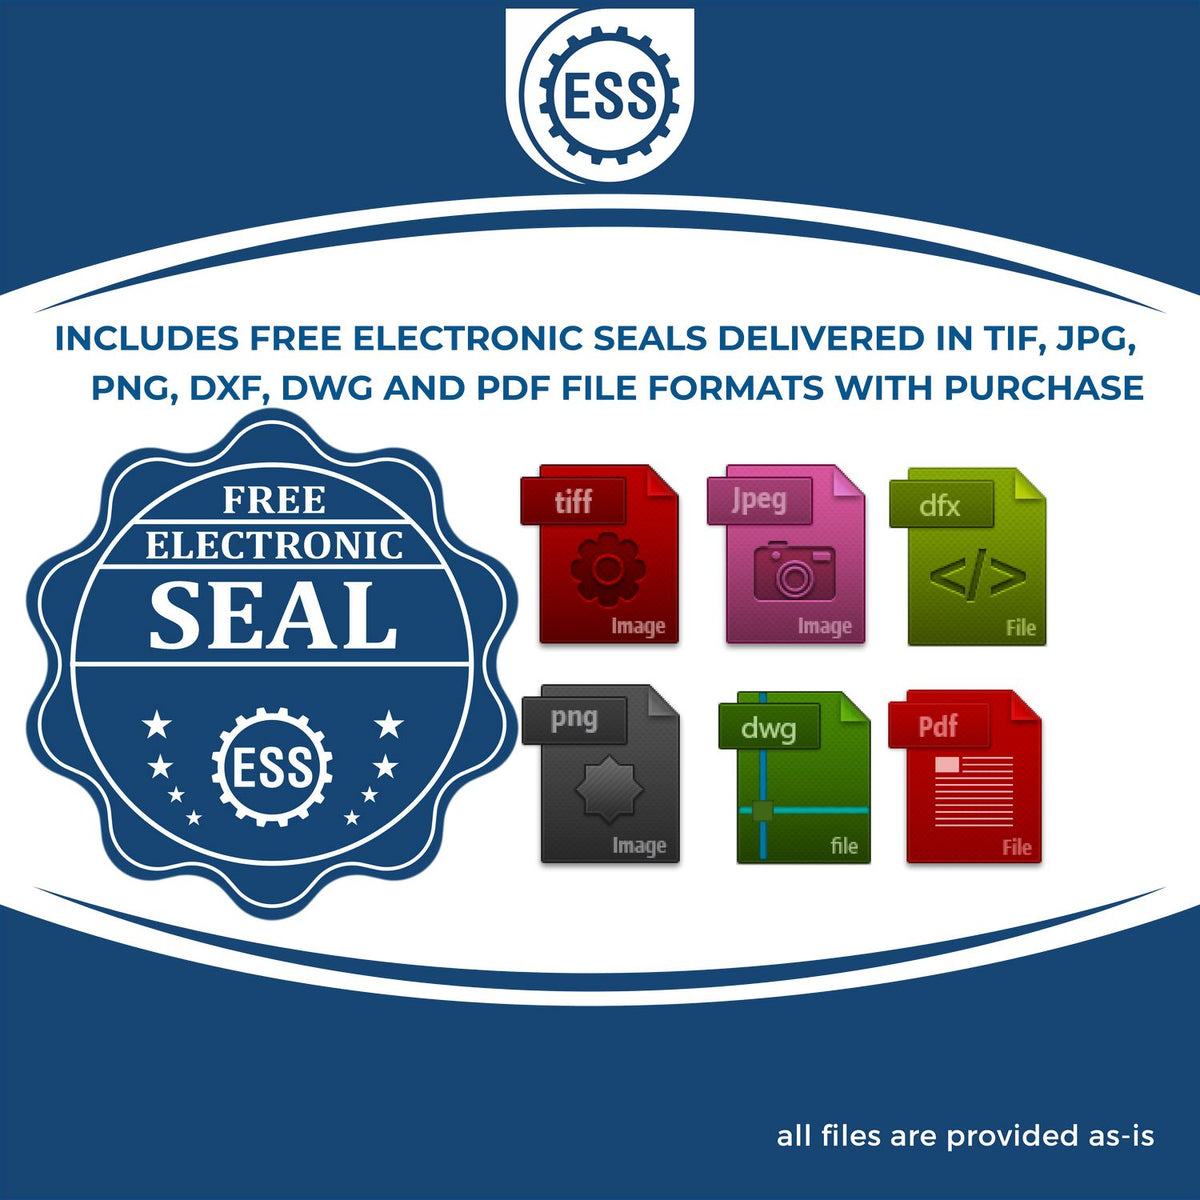 An infographic for the free electronic seal for the Gift New York Engineer Seal illustrating the different file type icons such as DXF, DWG, TIF, JPG and PNG.